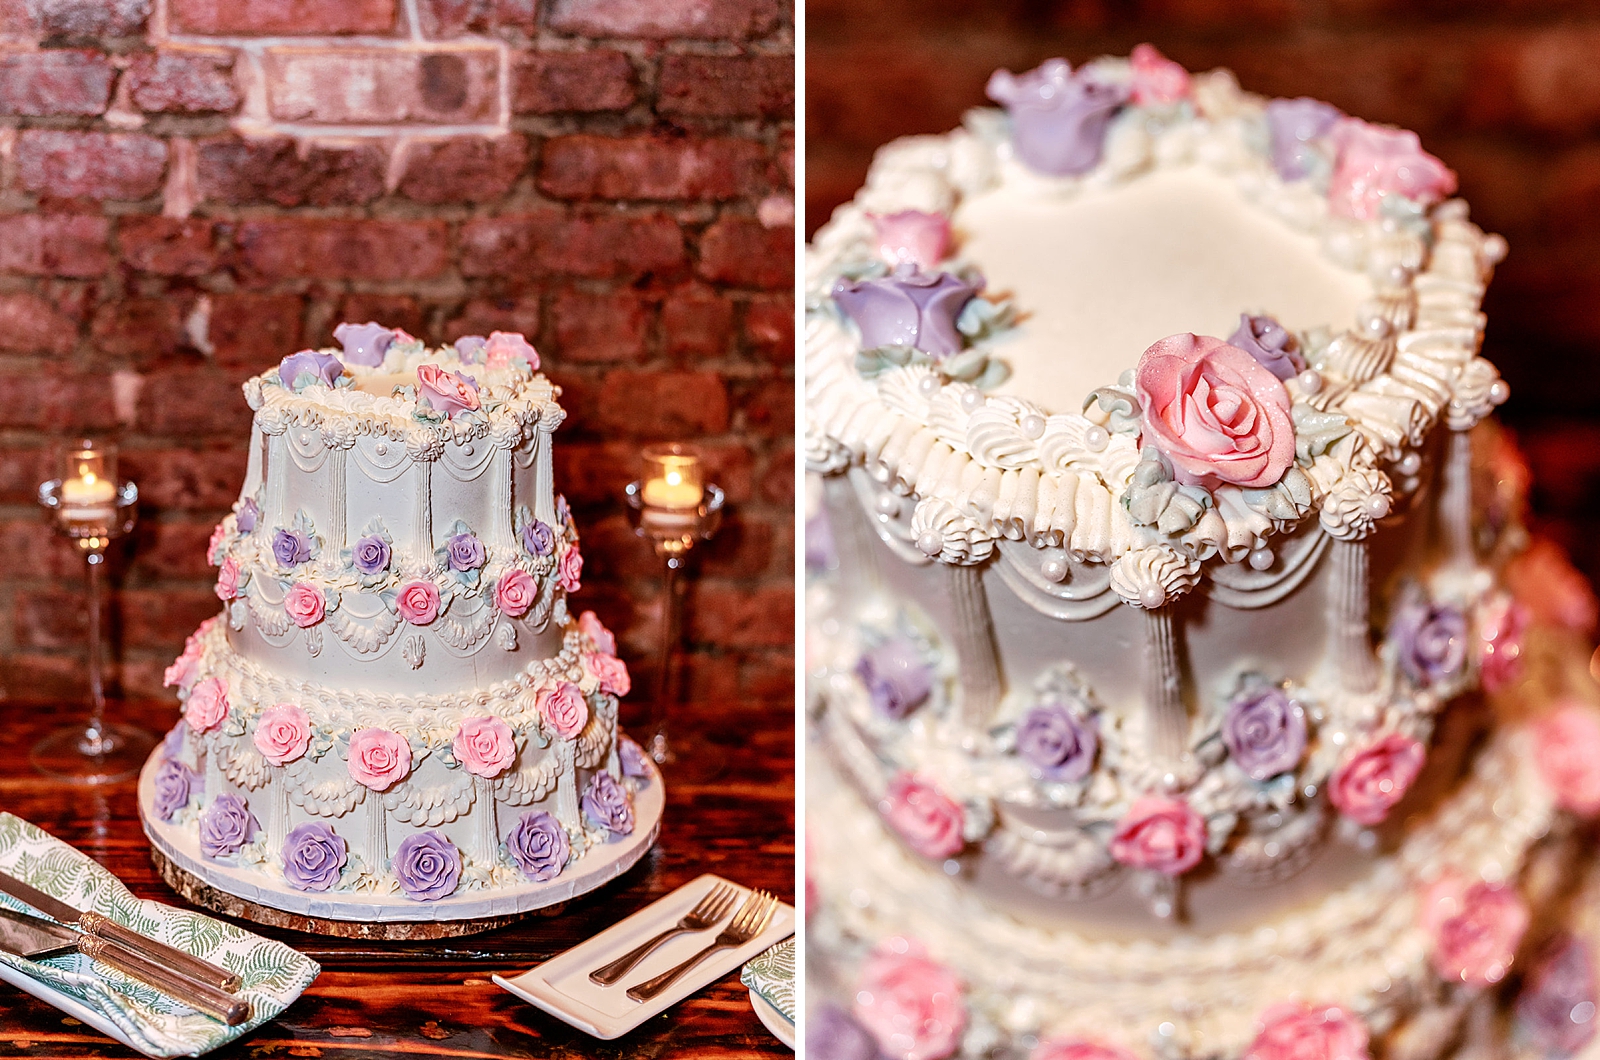 Left photo: Full shot of the white, pink and purple wedding cake. 
Right photo: Close up shot of the white, pink and purple wedding cake.